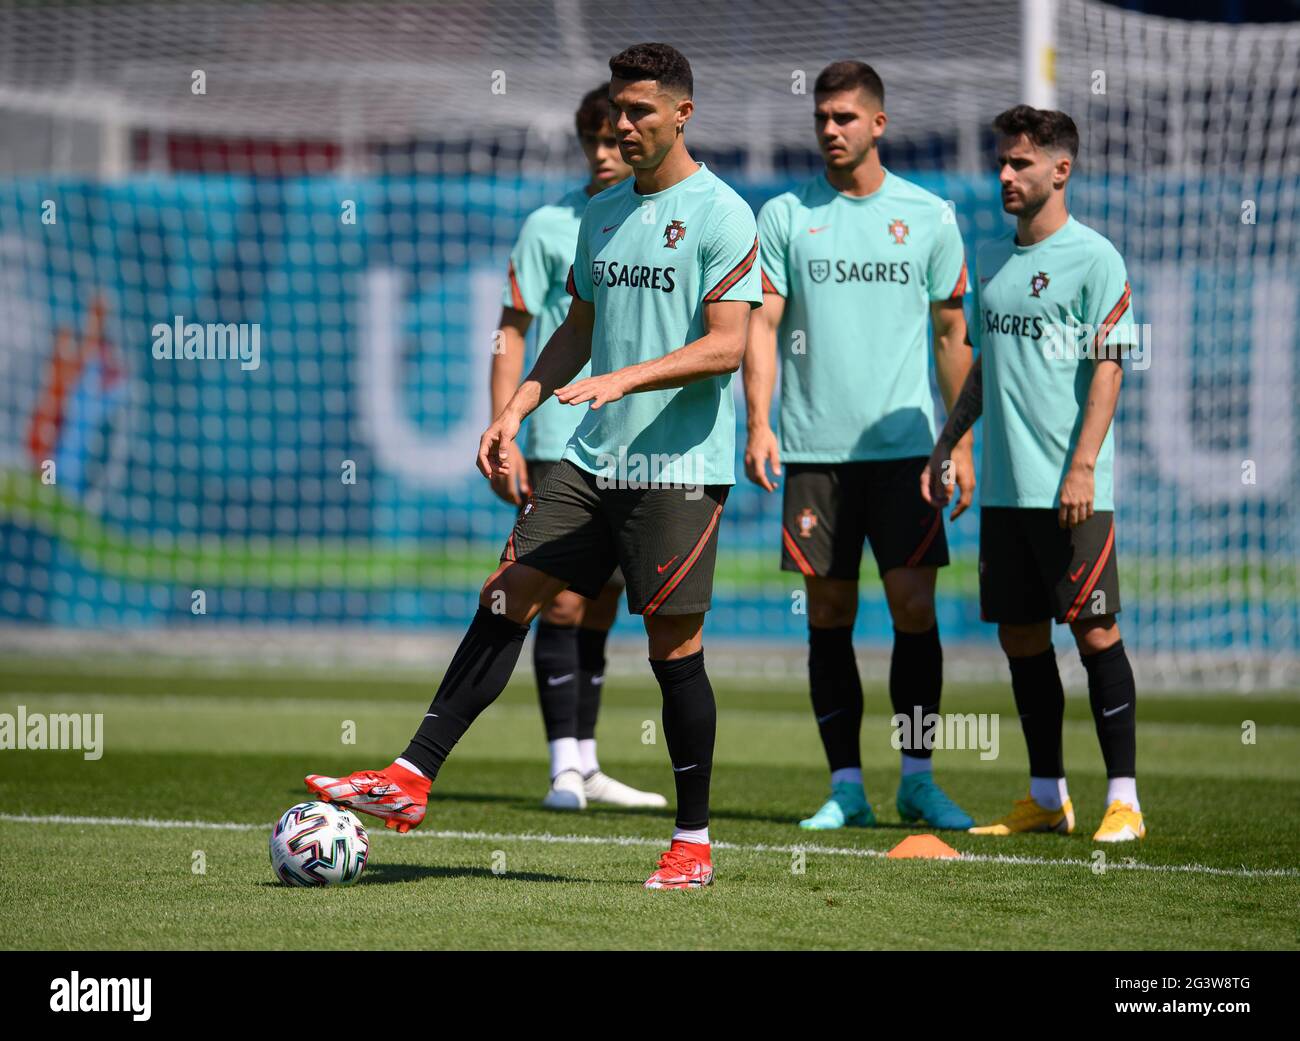 Budapest, Hungary. 17th June, 2021. Football: European Championship, Group F, before the match Portugal - Germany, Portugal training. Cristiano Ronaldo is on the field in front of Joao Felix (l-r), Andre Silva and Gonçalo Guedes. Credit: Robert Michael/dpa-Zentralbild/dpa/Alamy Live News Stock Photo